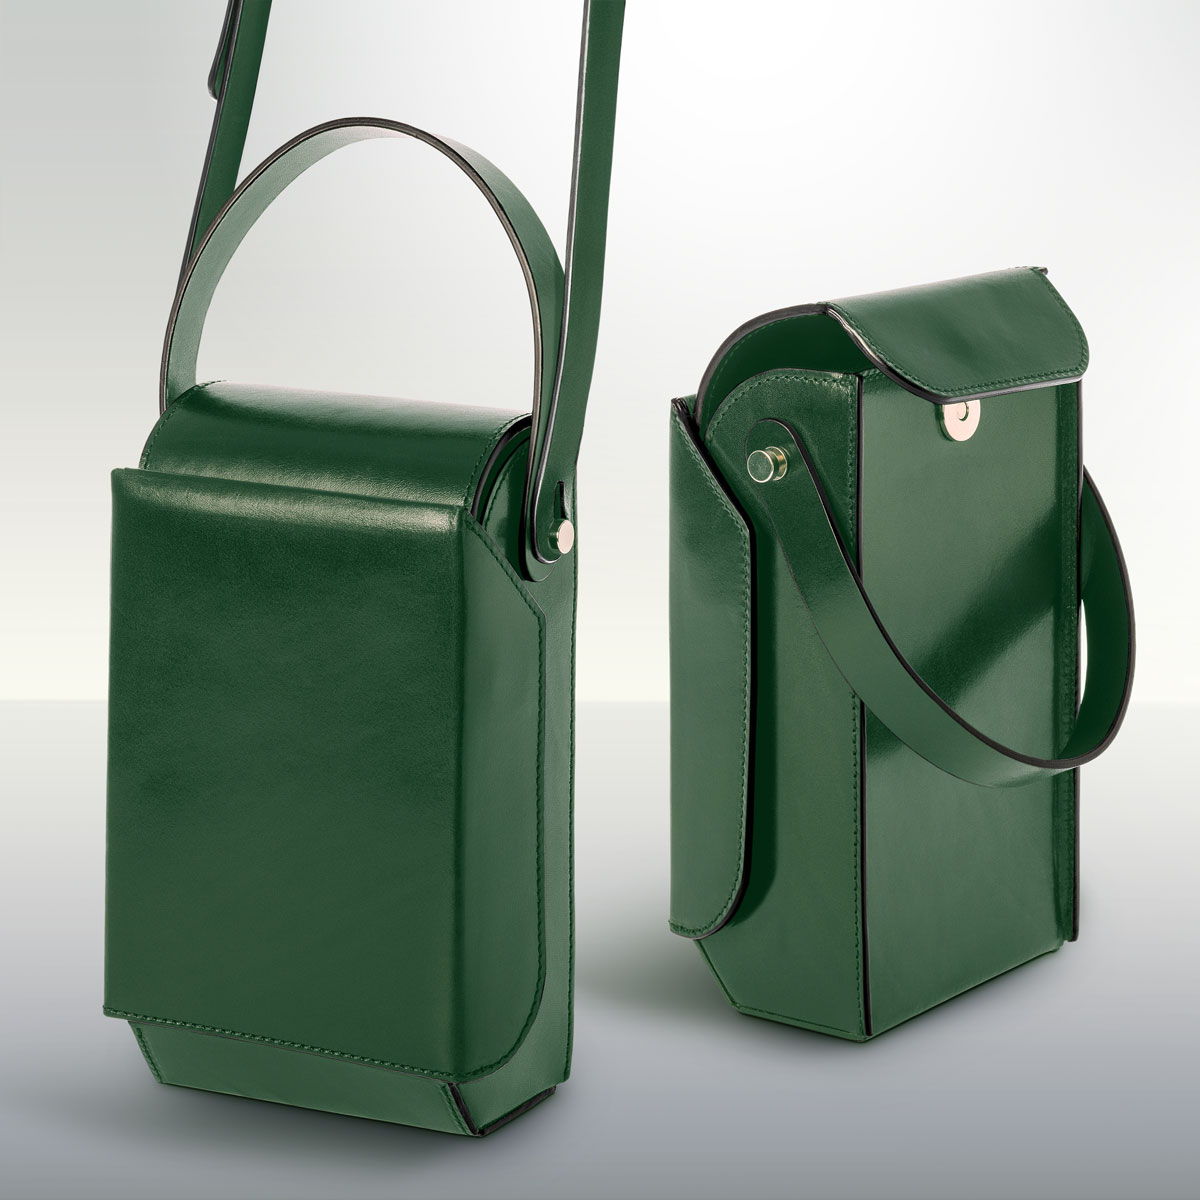 Merryl Tielman, Frank bag: an elegantly sized, rigid crossbody/hand bag with a 'flip open' front compartment. Made in Italy, vegetable tanned cow leather, colour dark green.